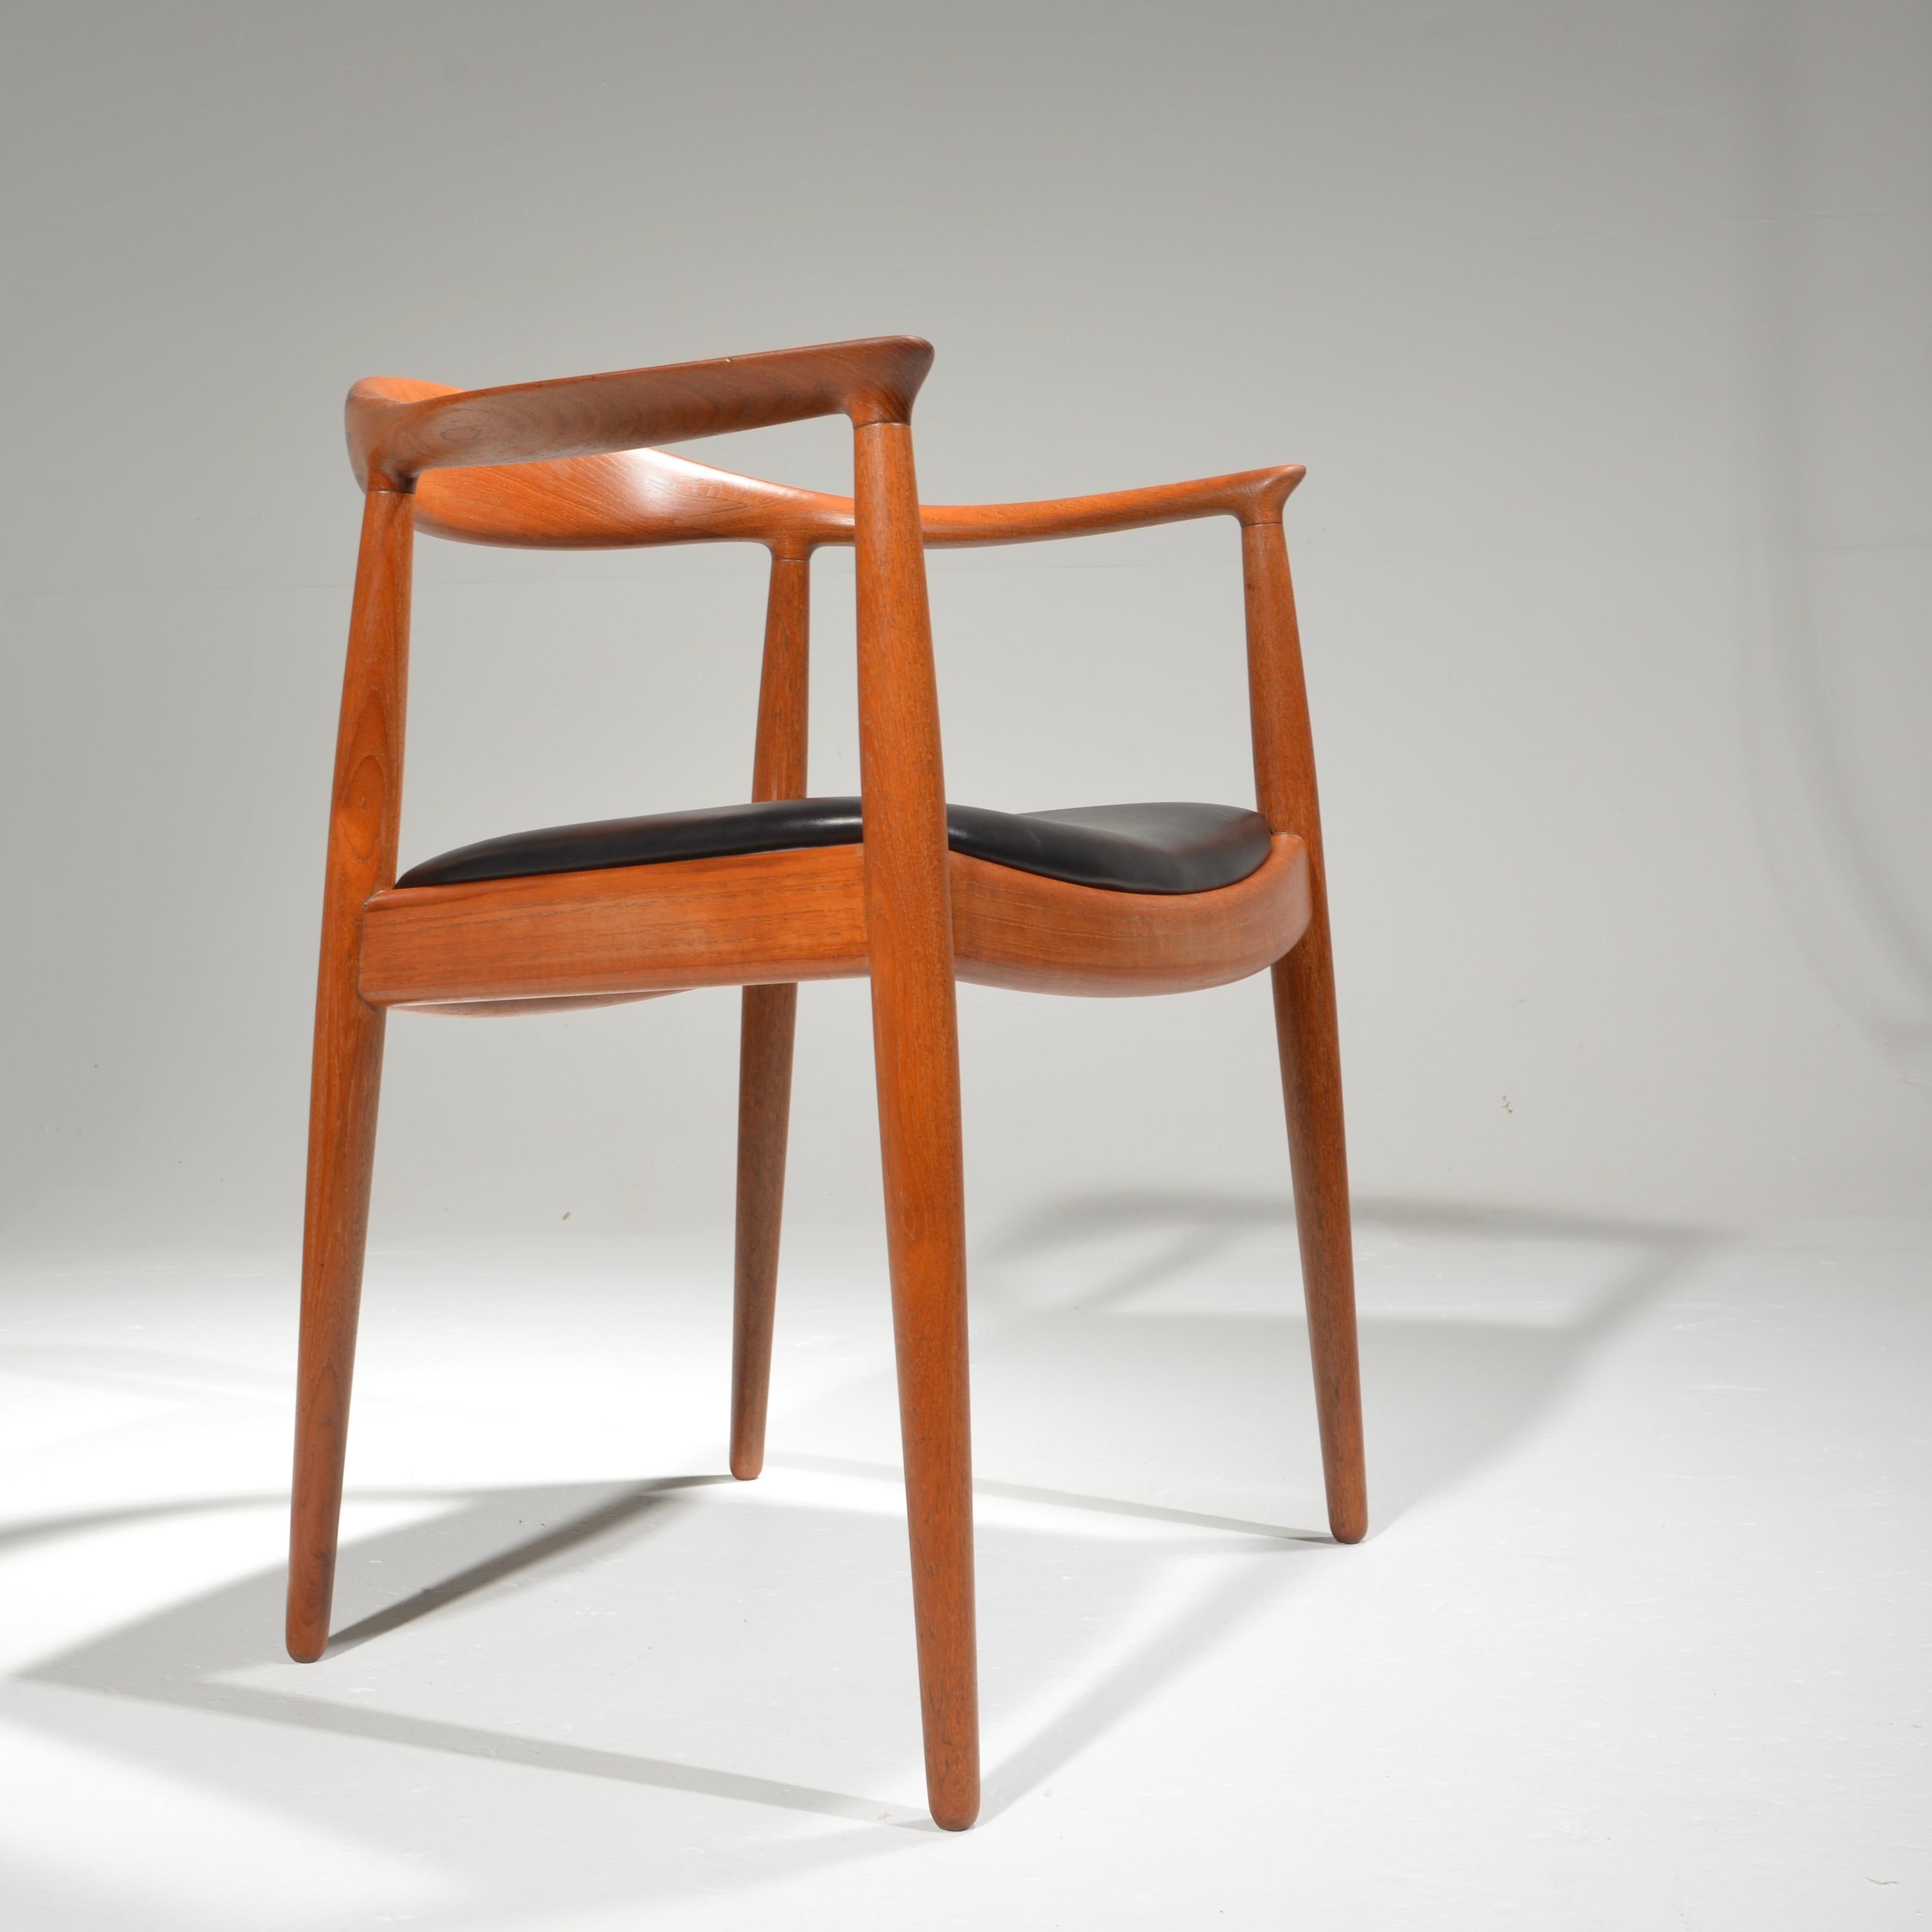 Mid-20th Century 10 Hans Wegner for Johannes Hansen JH-503 Chairs in Teak and Leather For Sale